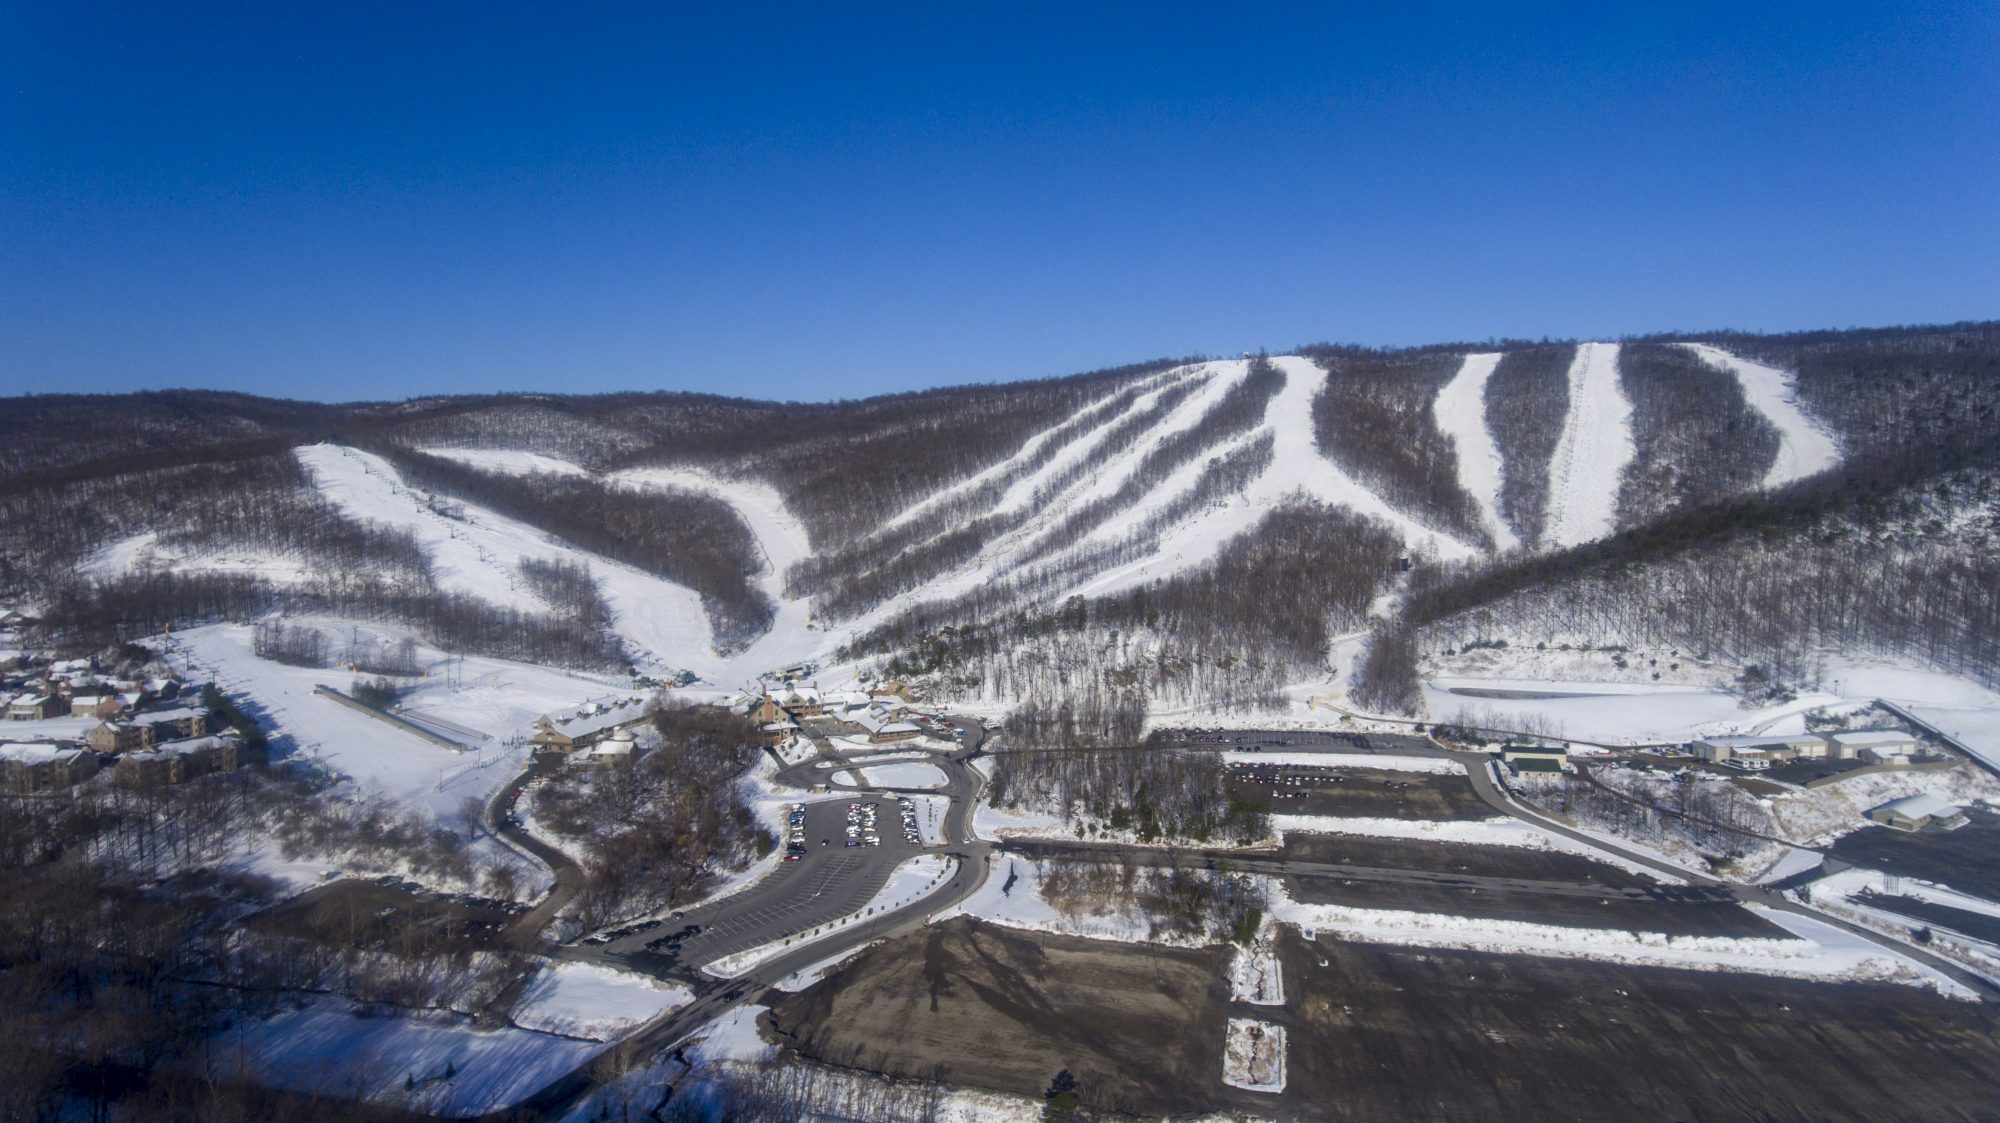 Whitetail Mountain Resort. Peak Resorts Completes Acquisition of Snow Time.